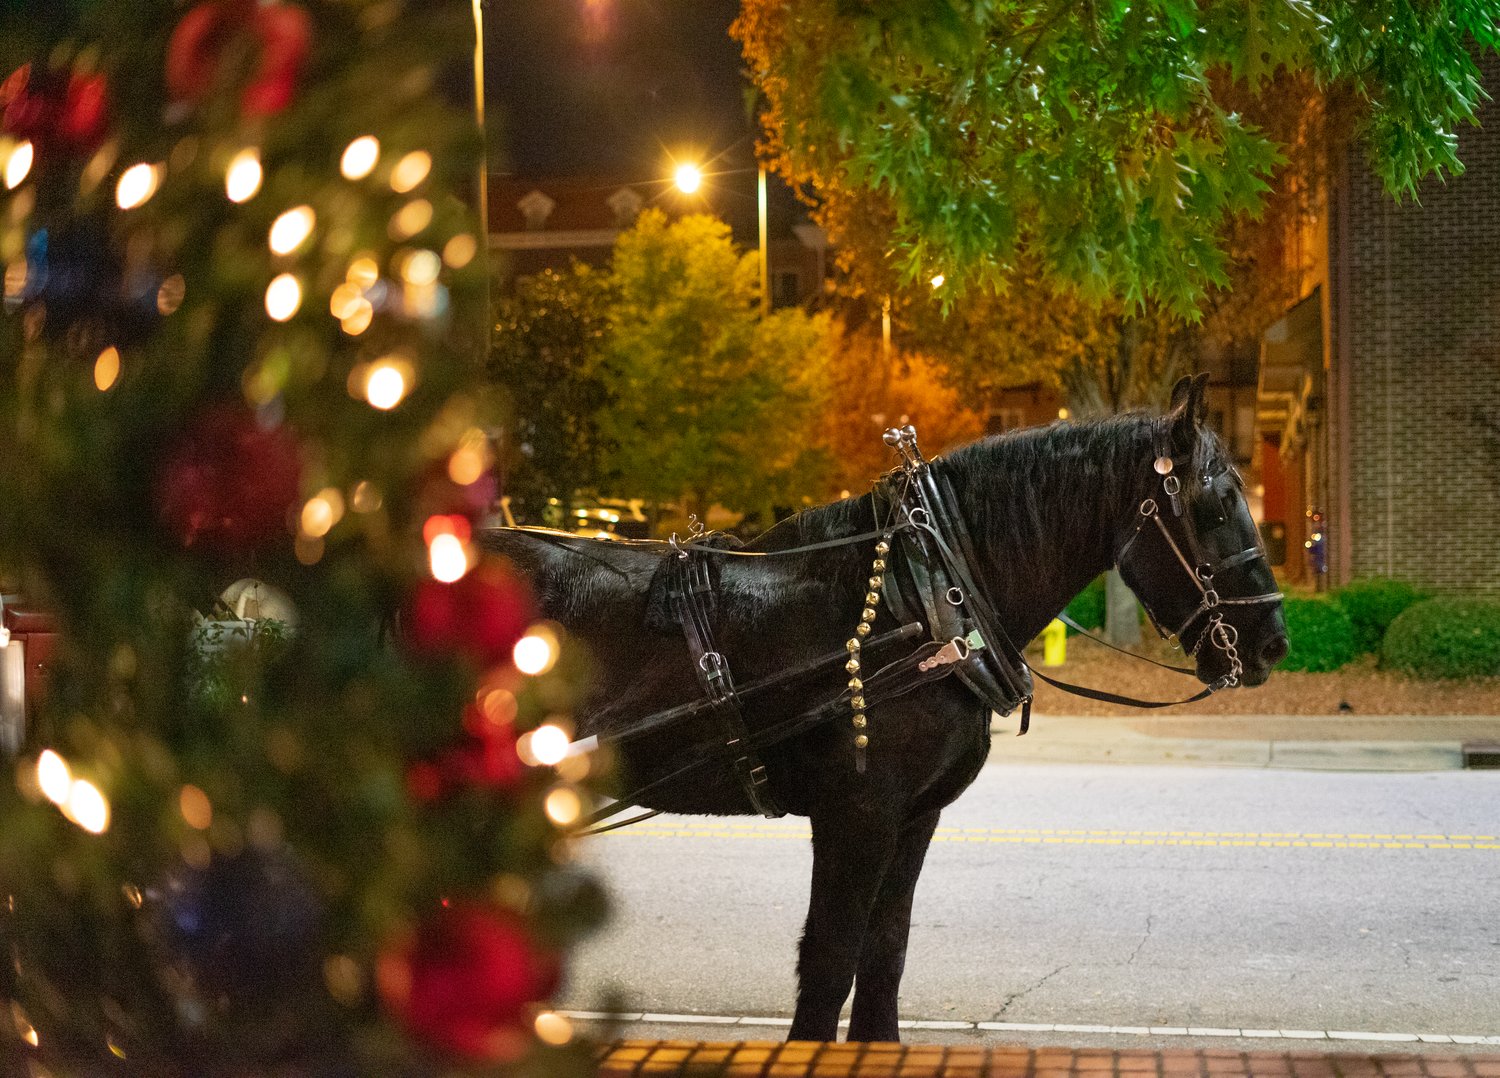 The 23rd annual A Dickens Holiday & Carriage Rides, hosted by the Downtown Alliance, was held on  Nov. 25 at the Fayetteville History Museum.